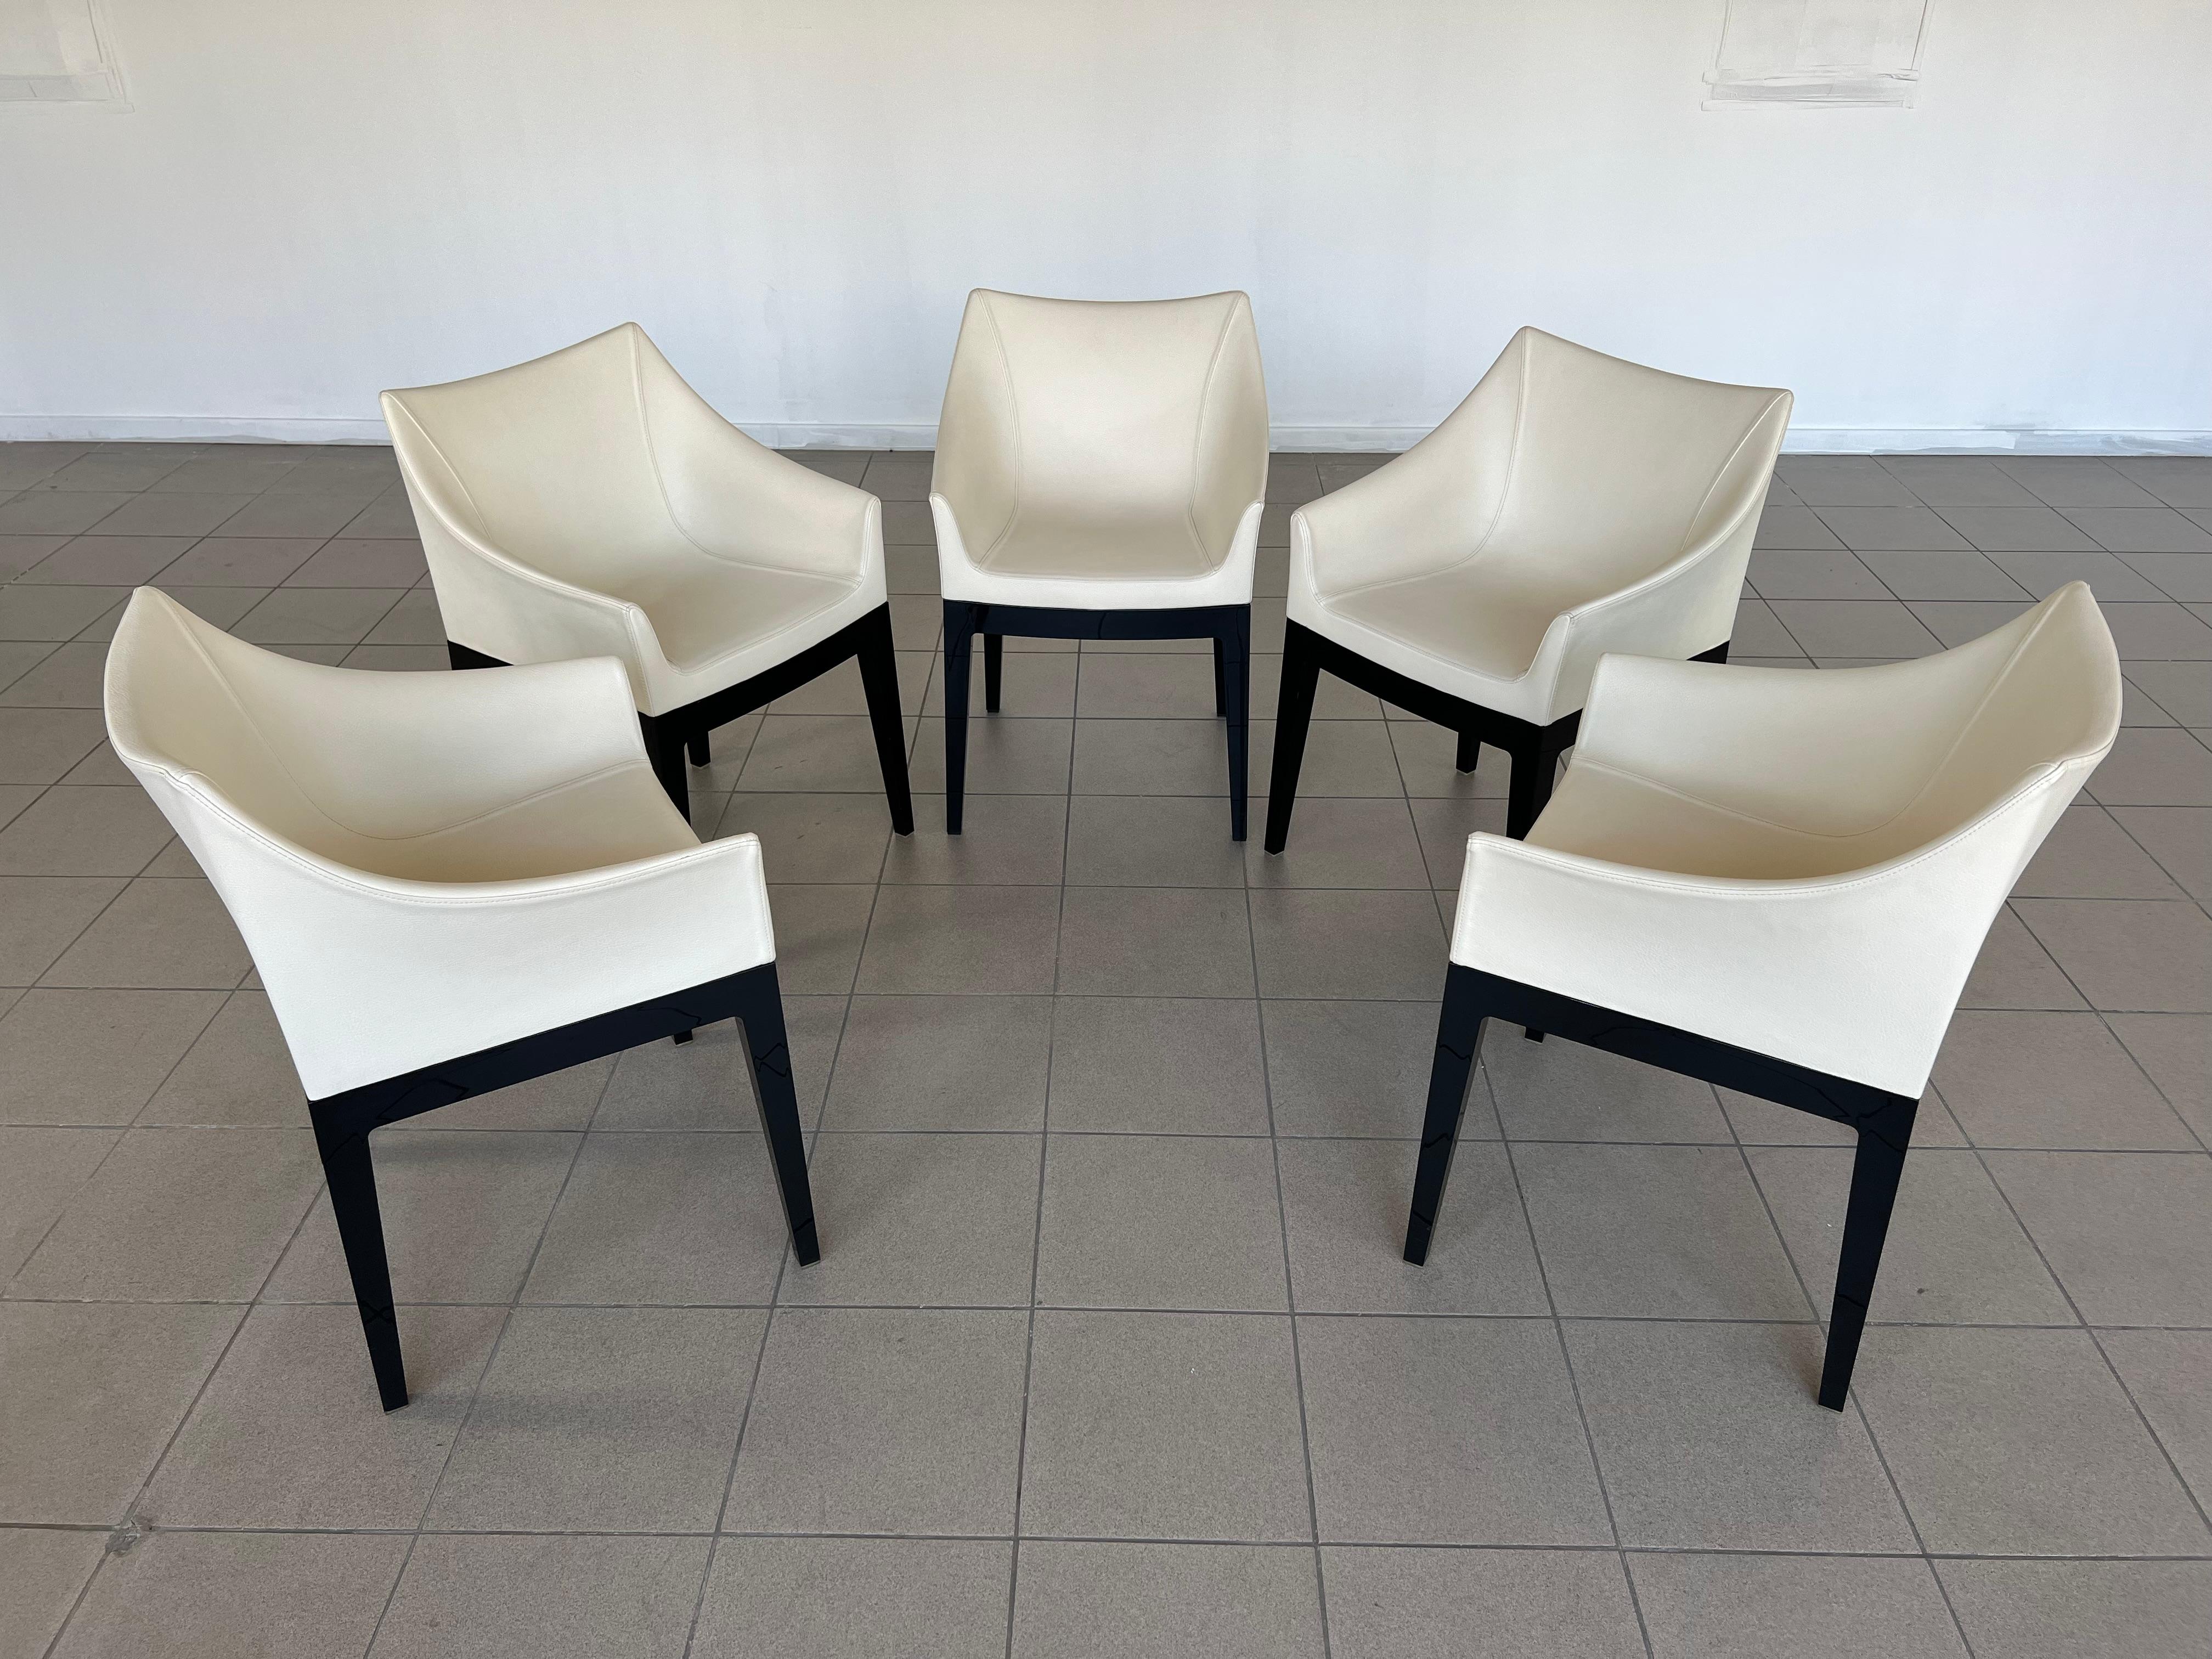 Original Mademoiselle Leather Chairs by Philippe Starck for Kartell - Set of 5 For Sale 5